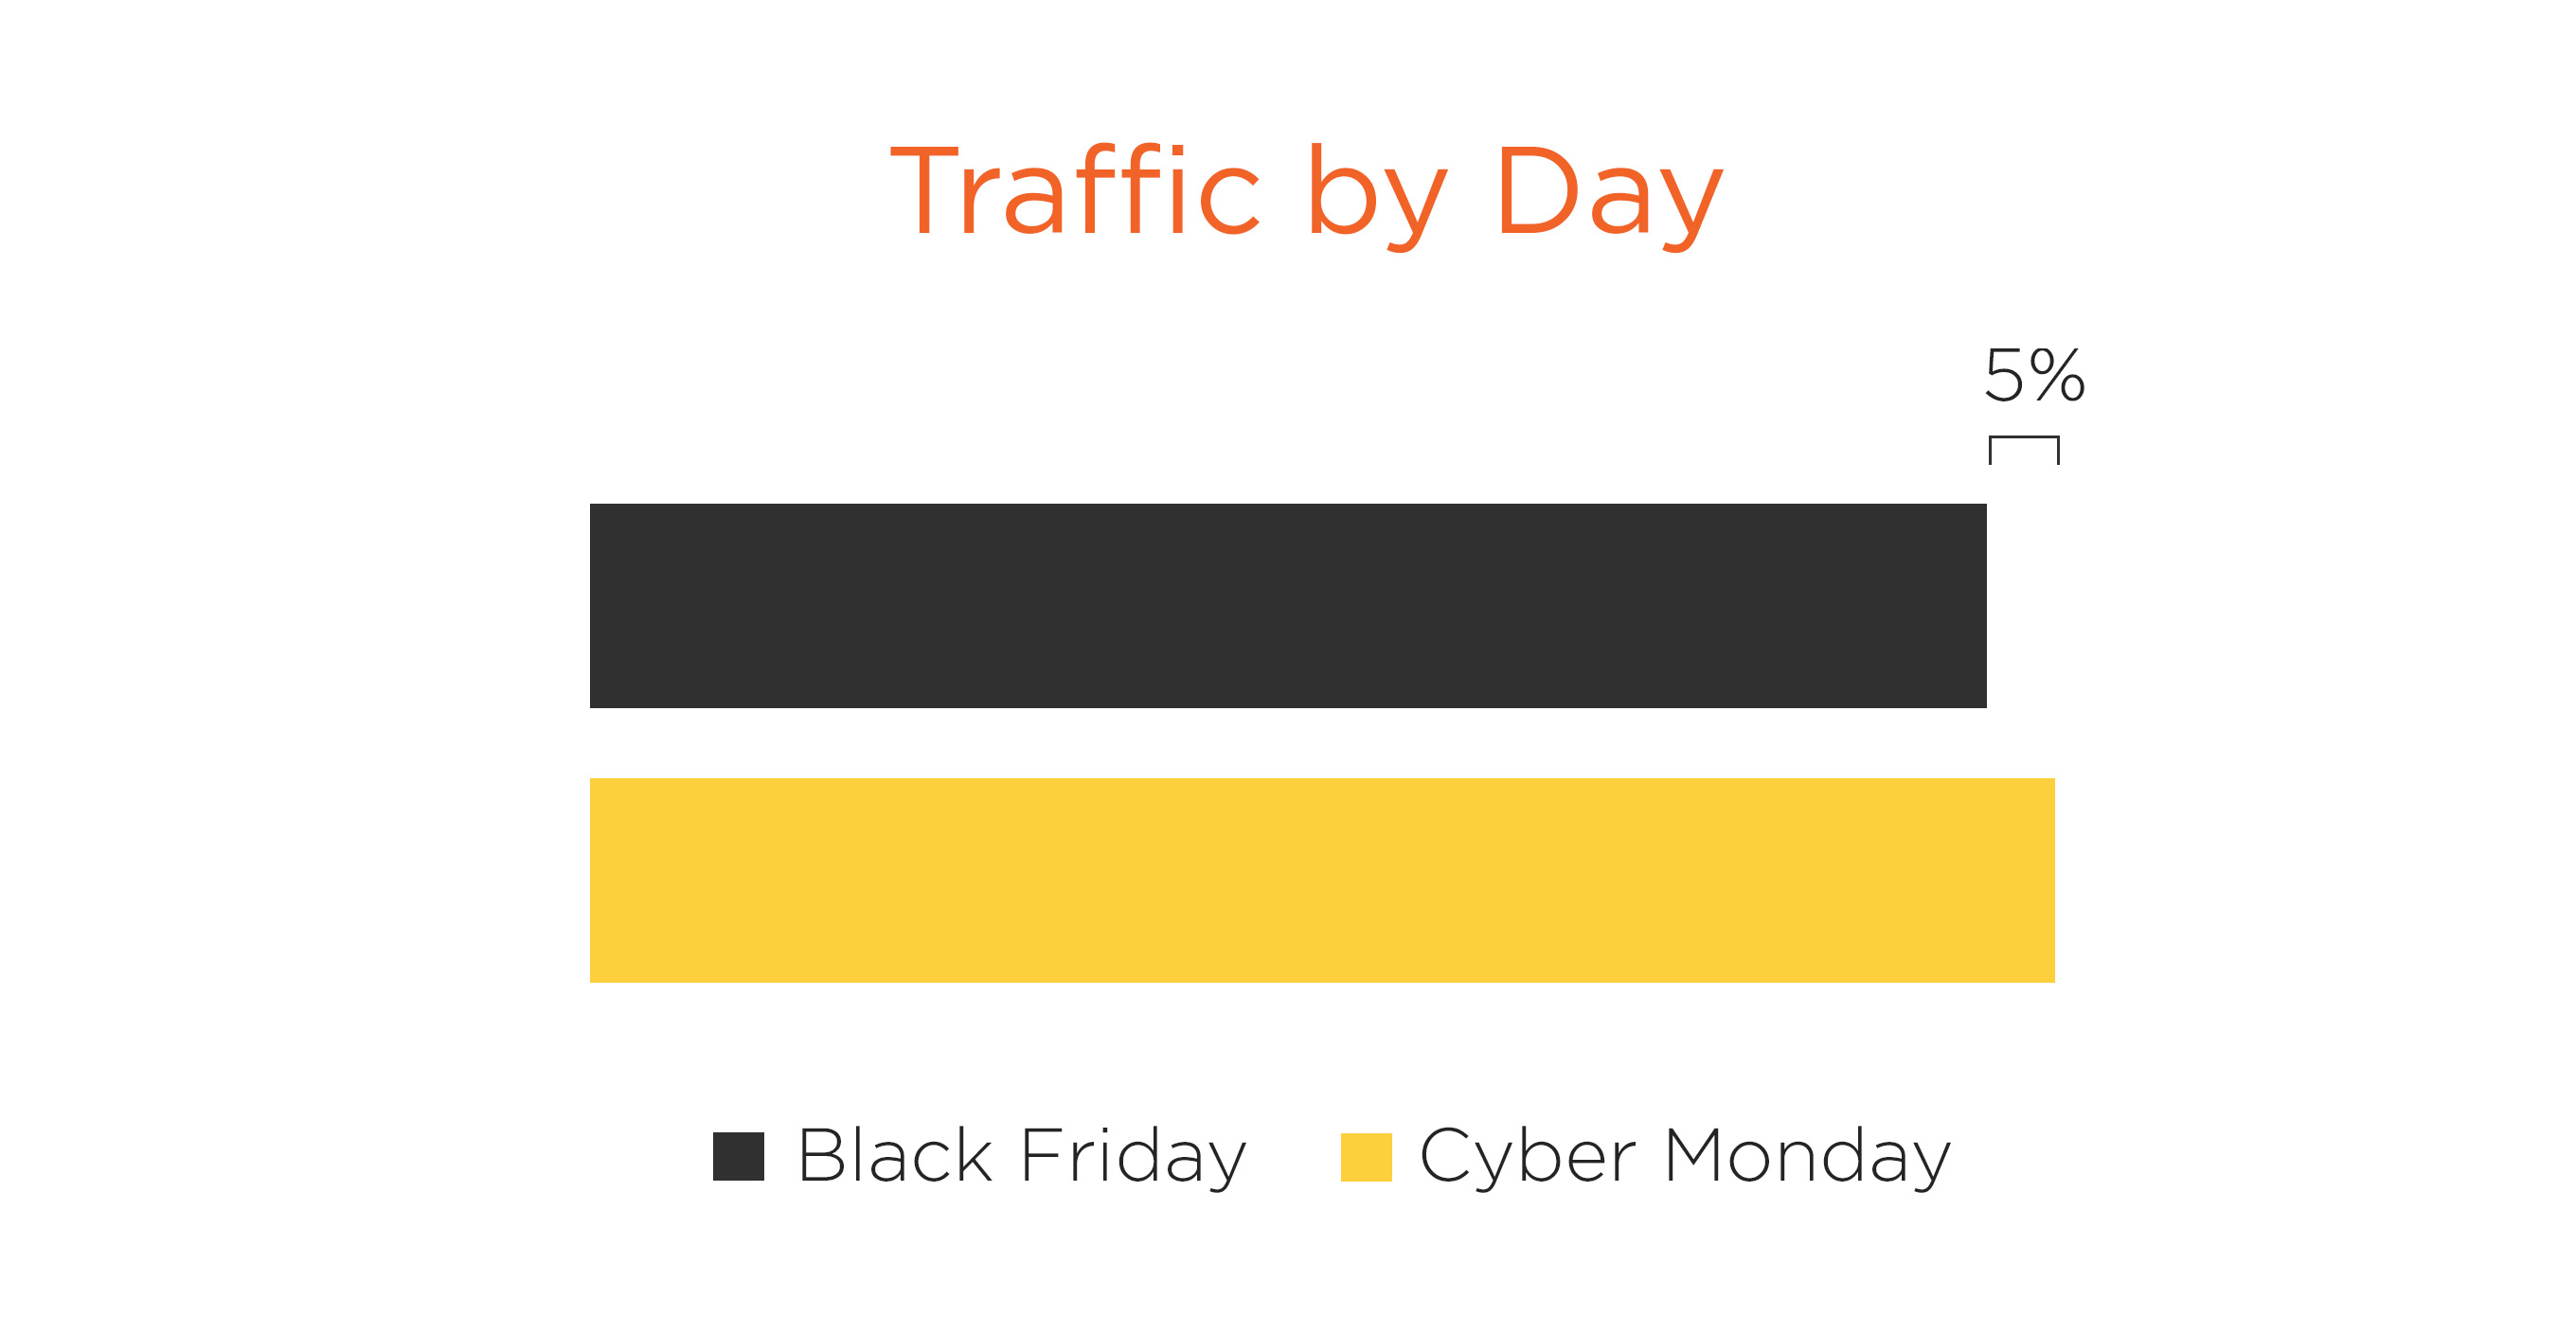 Black Friday and Cyber Monday Traffic